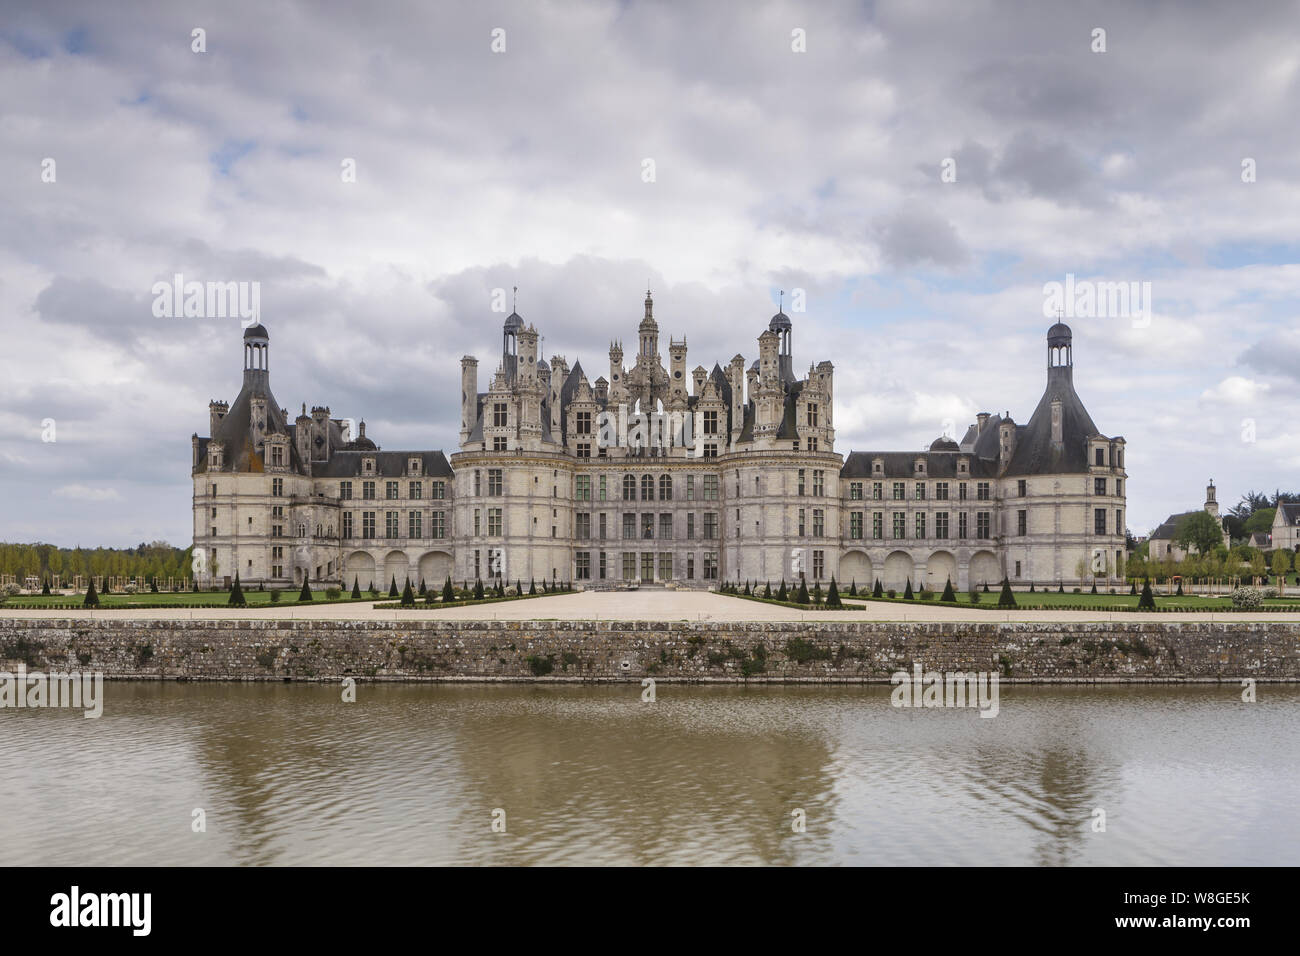 Chateau de Chambord in the Loire Valley, France. Stock Photo